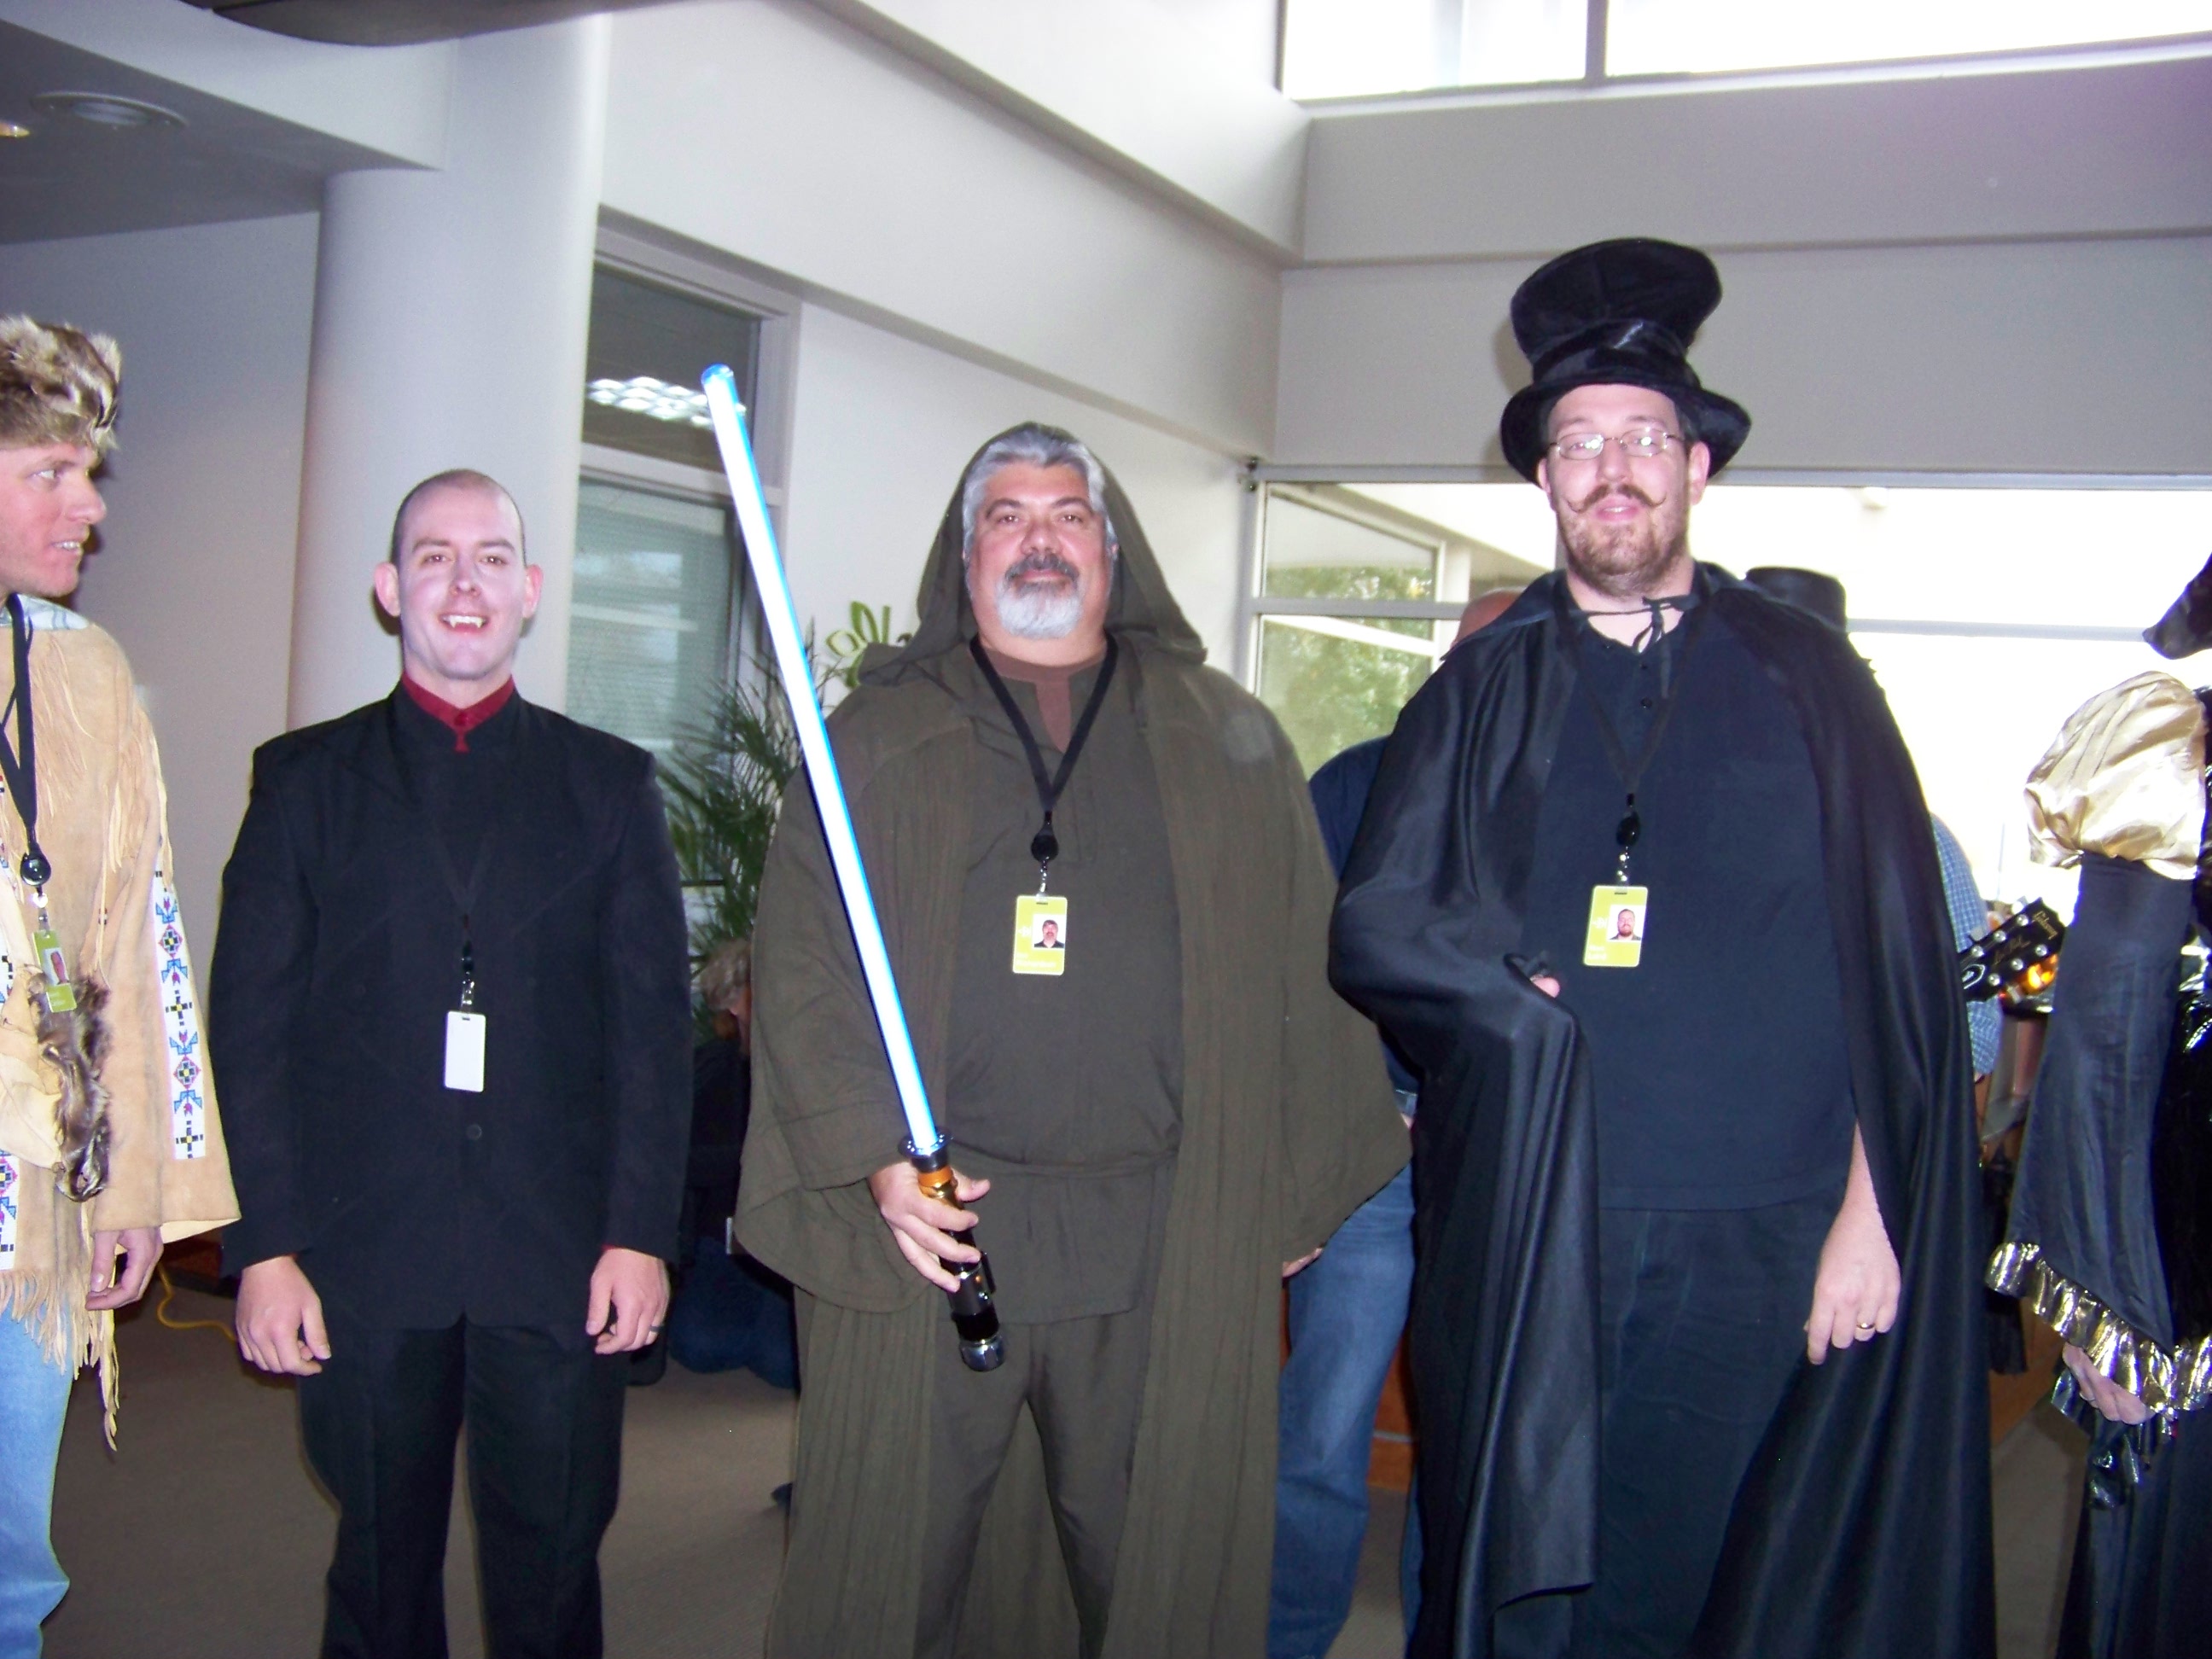 Company Halloween party - Jedi wearing security badge